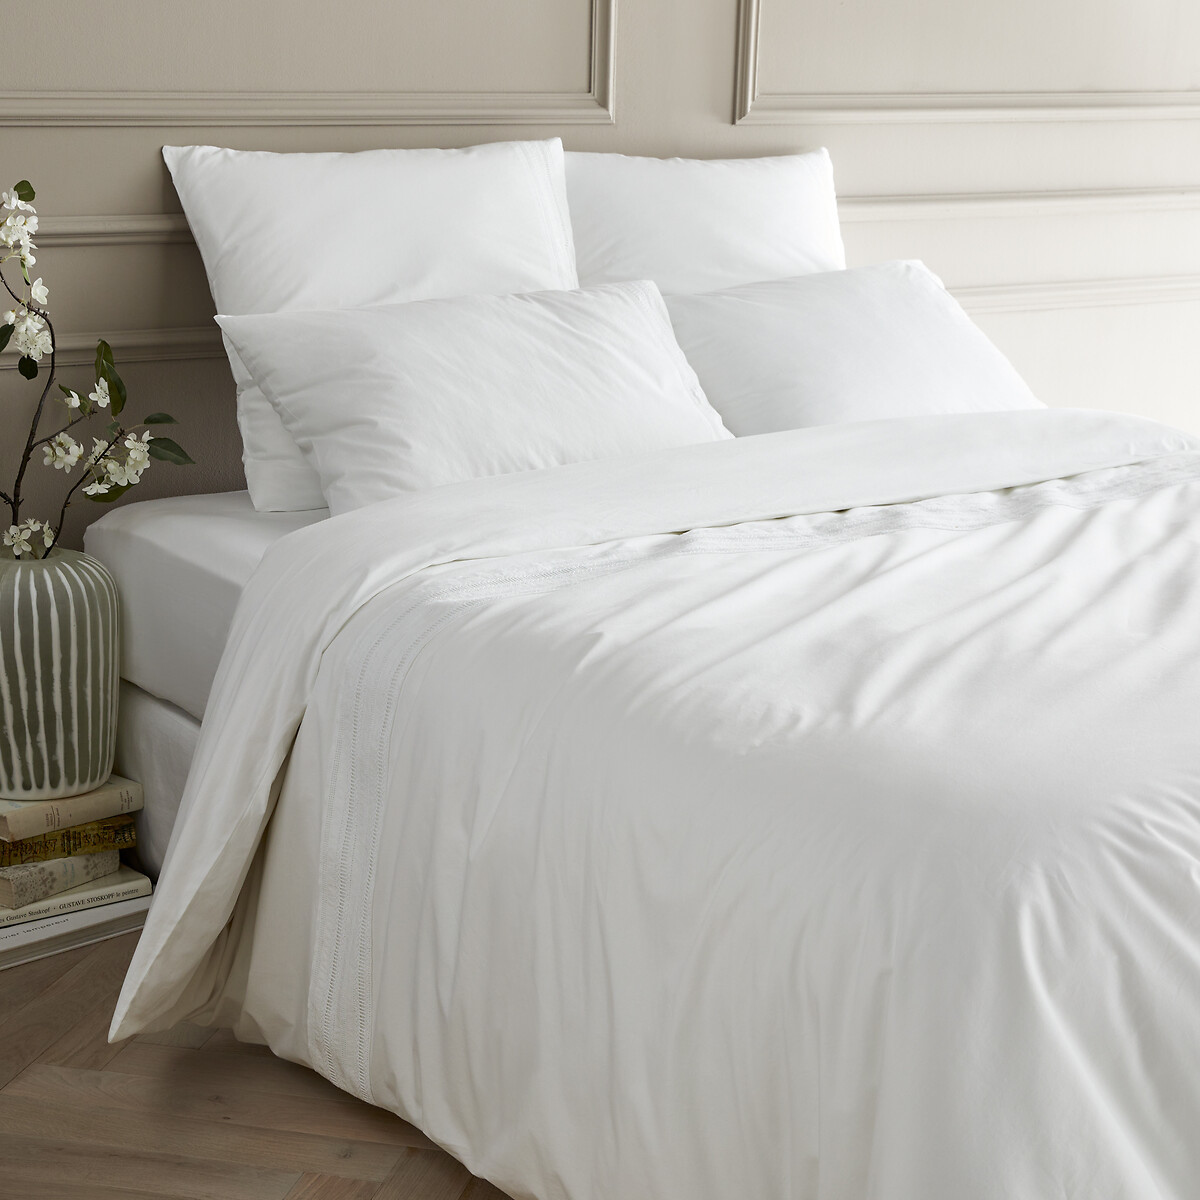 Florentina Embroidered 100% Cotton Percale Duvet Cover